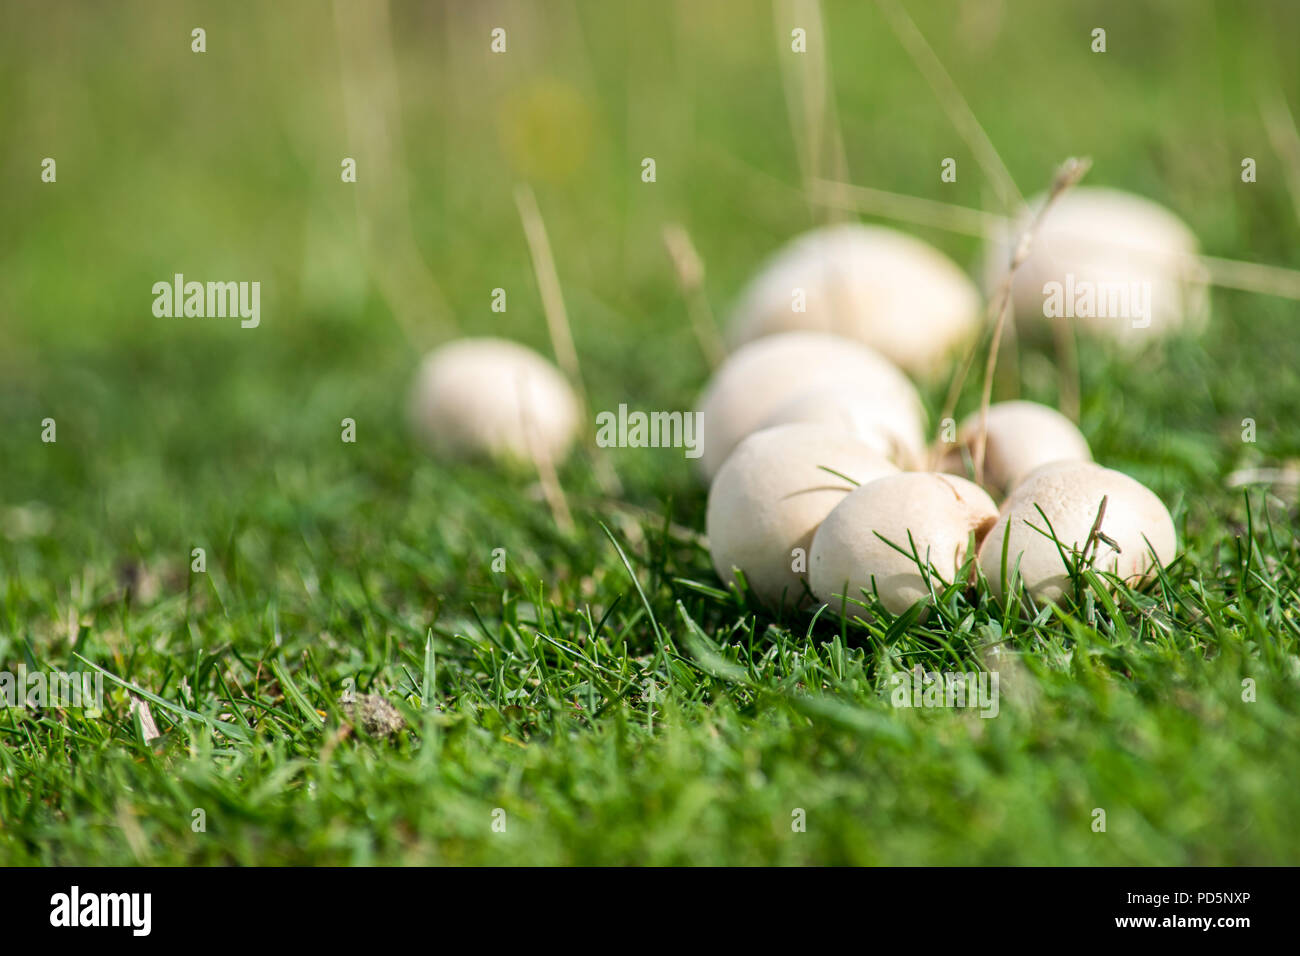 Collection of puffball fungus fruiting bodies in grass Stock Photo